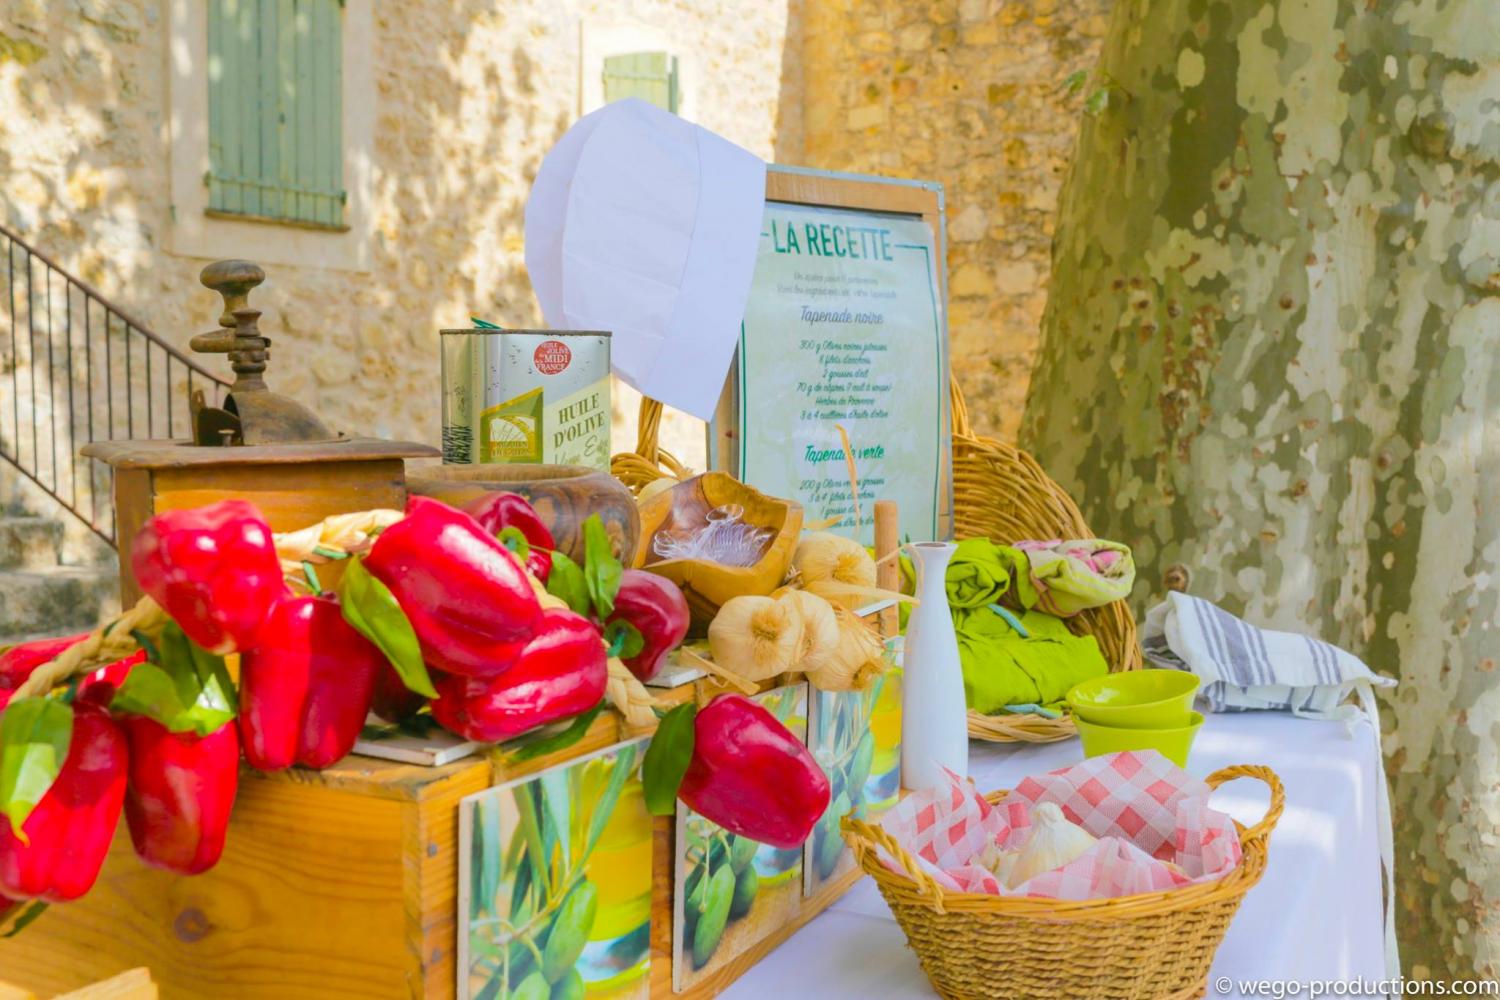 A "Provençal market" recreated at the venue of your event